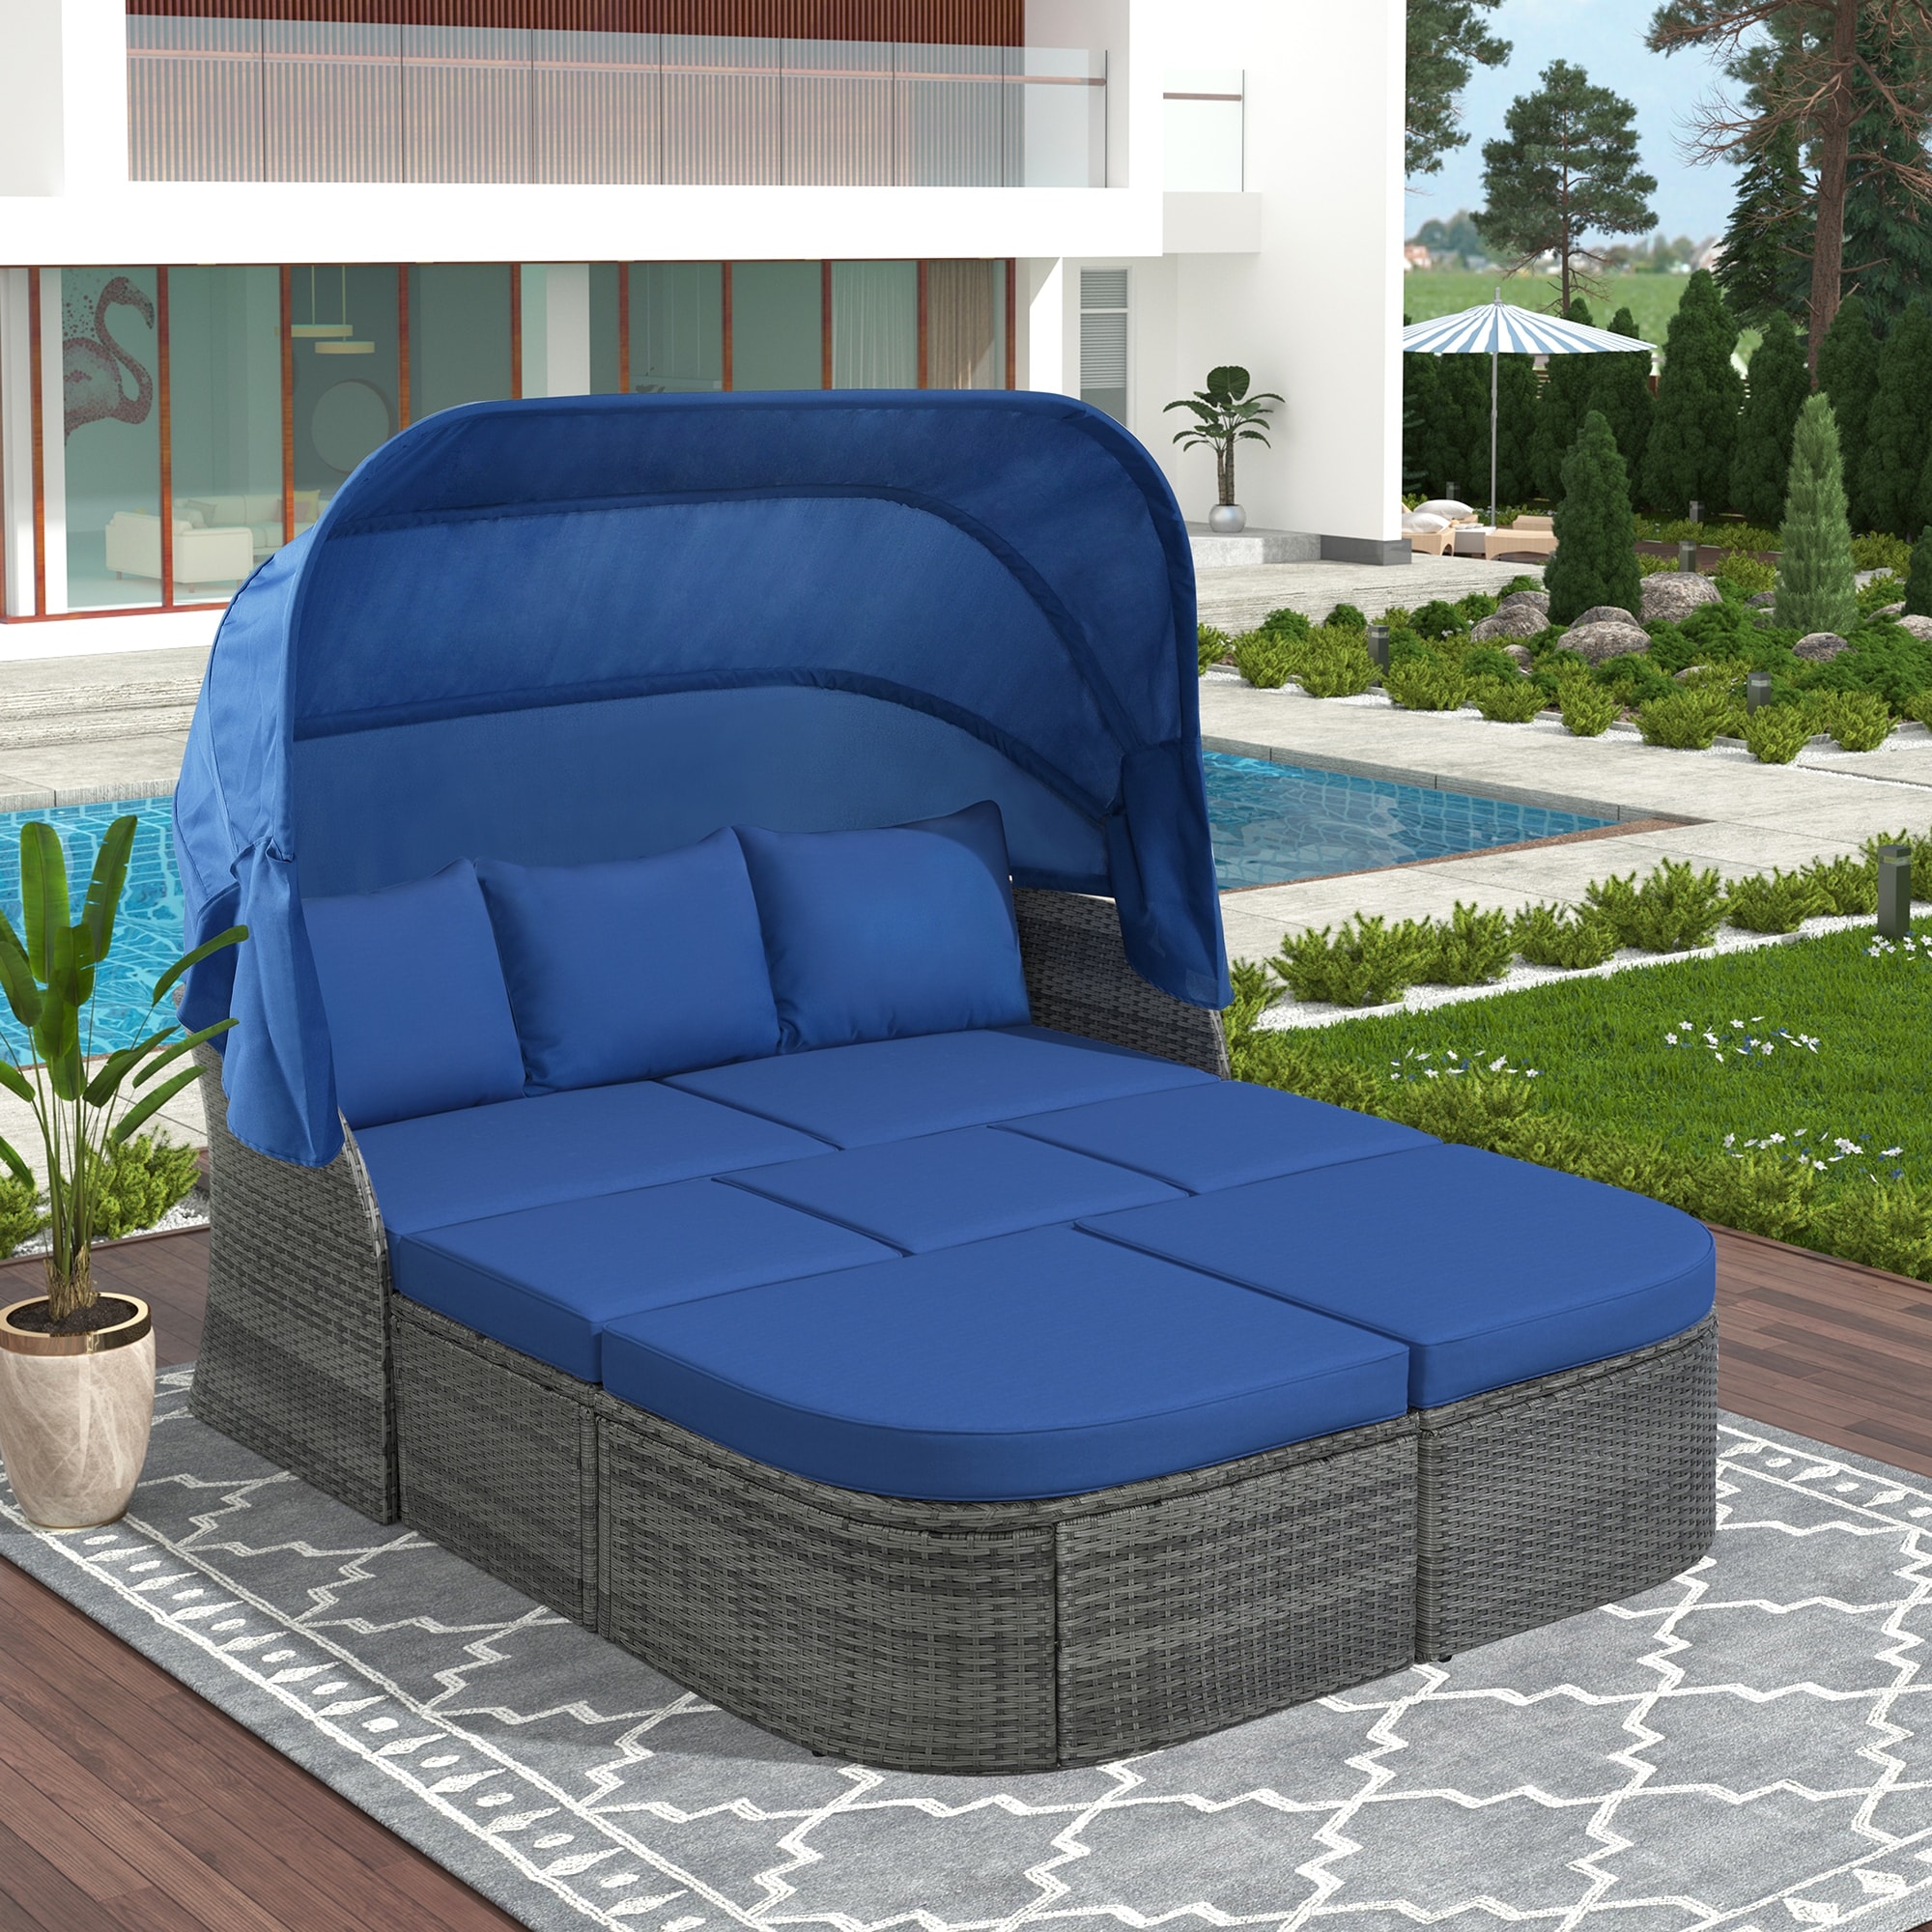 Patio Furniture Set  Outdoor Daybed  Sunbed  And Conversation Set With Canopy